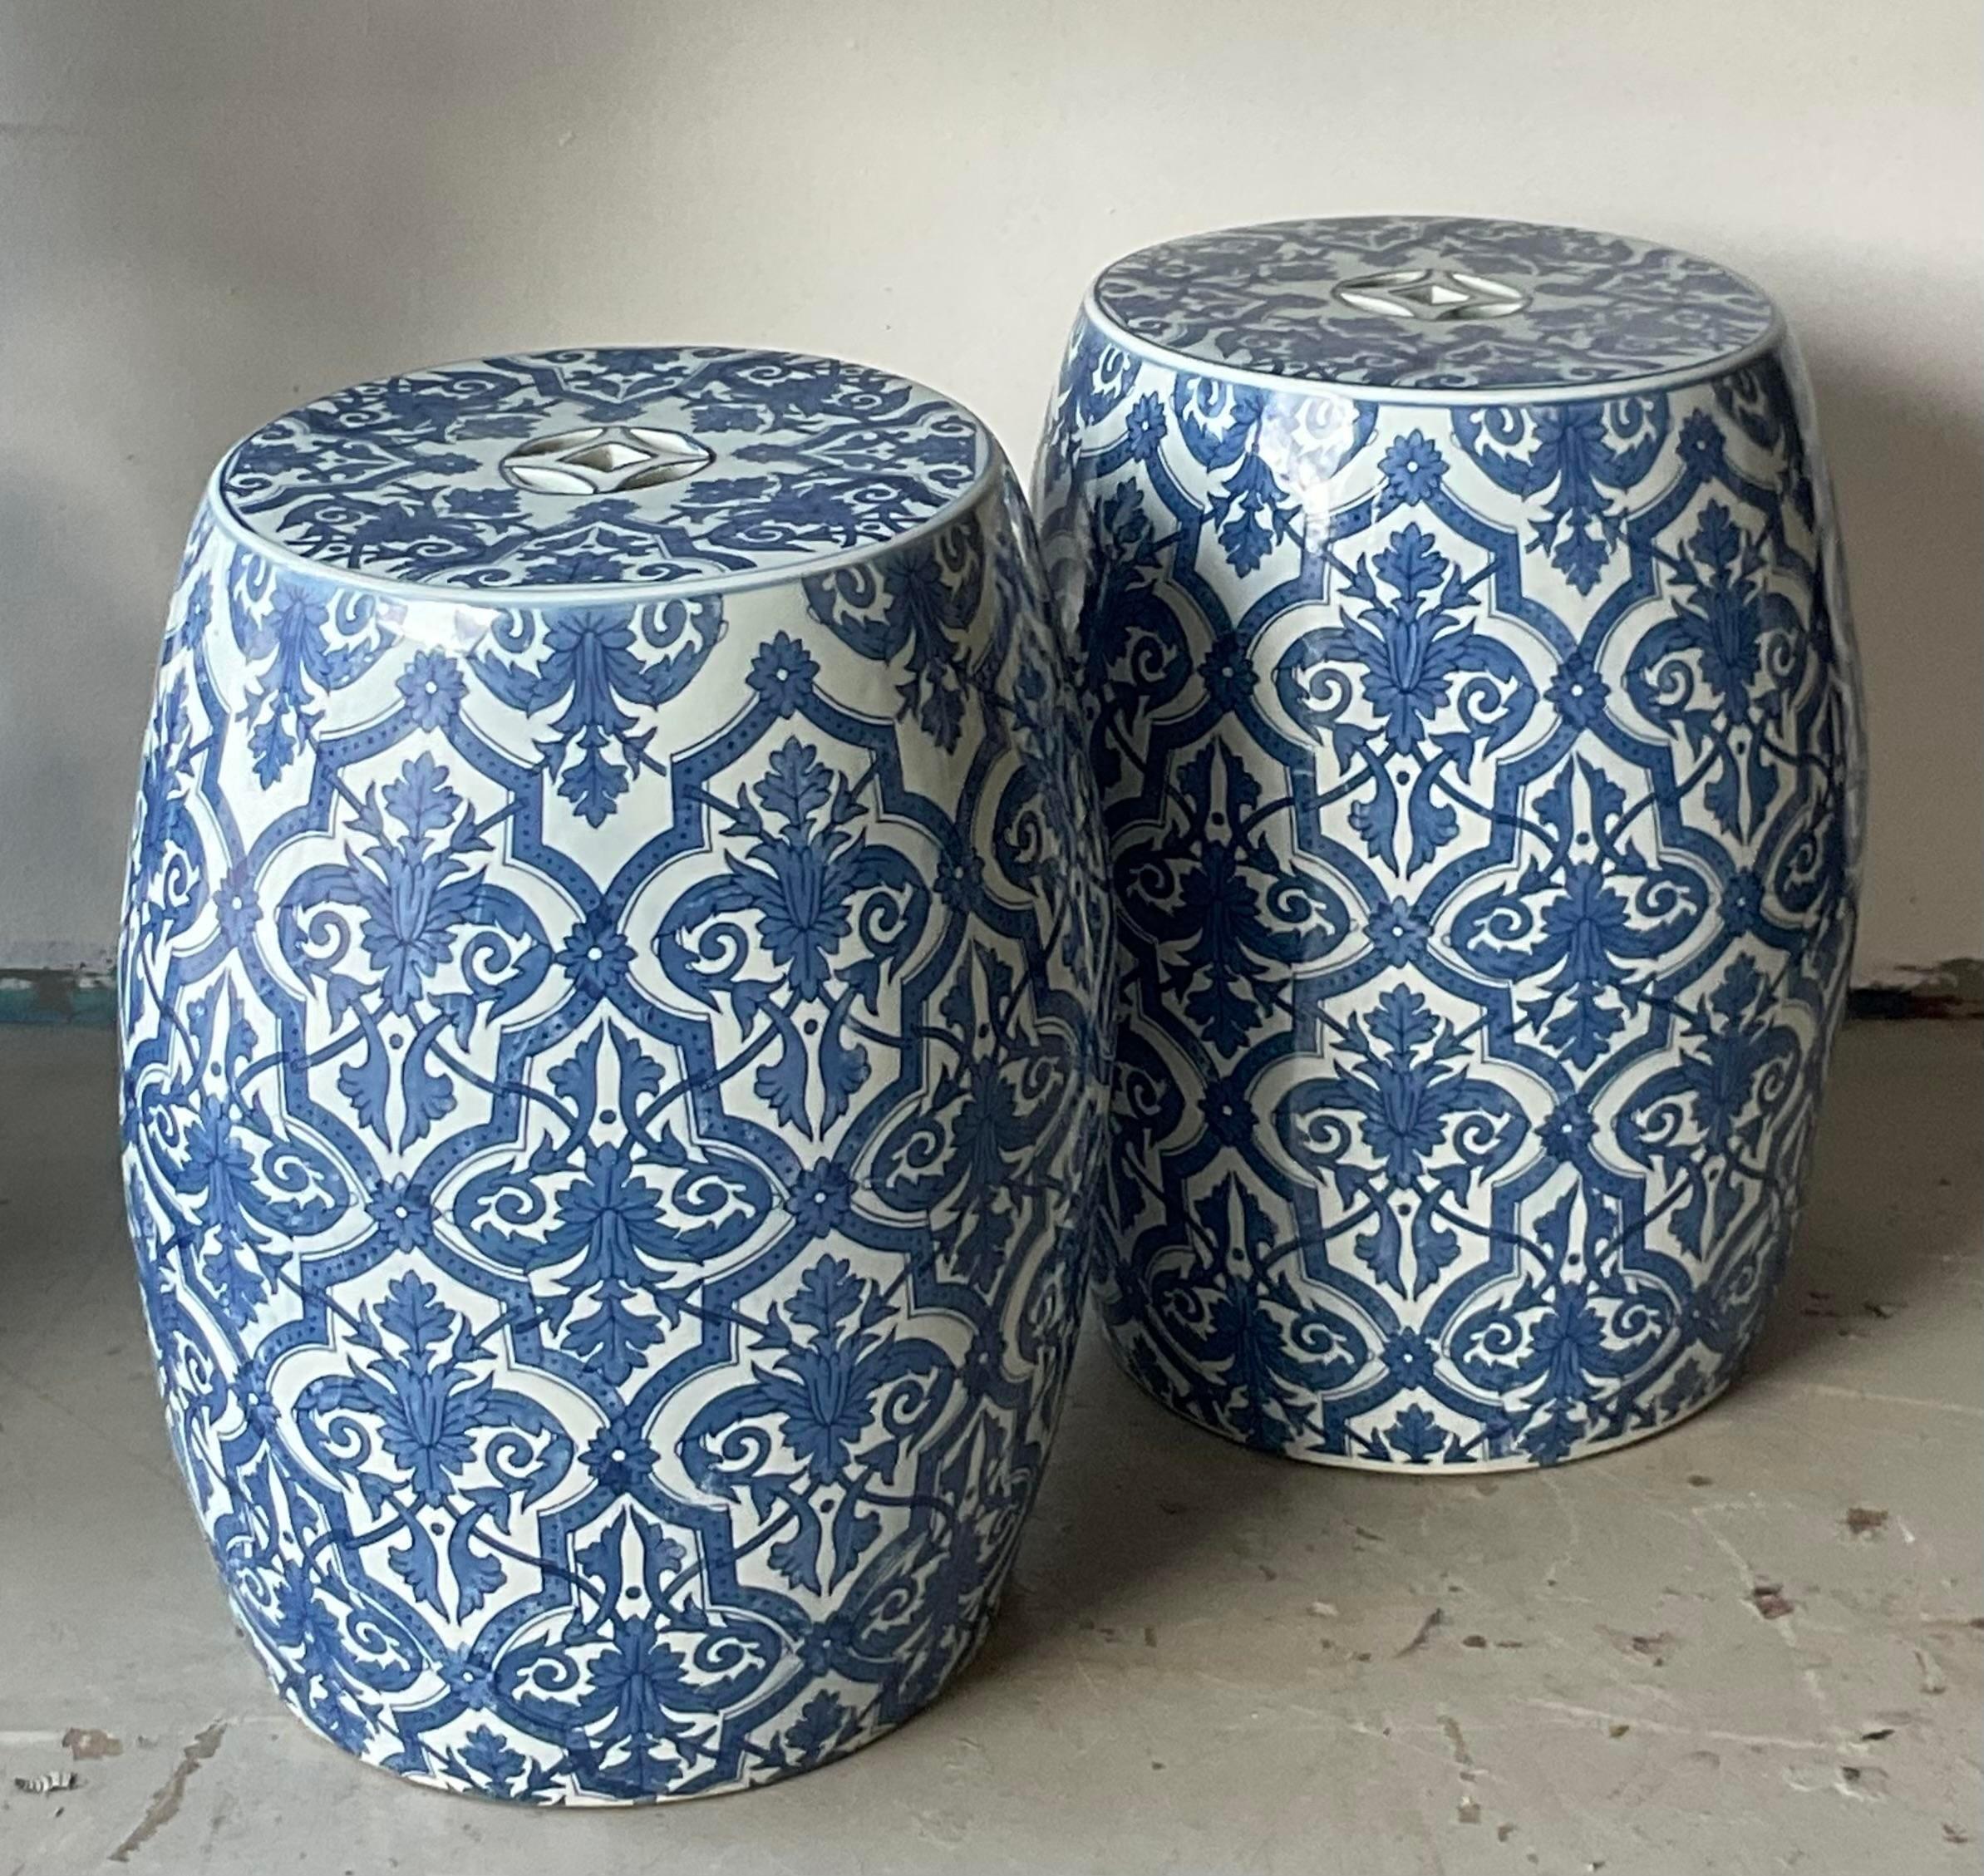 20th Century Vintage Coastal Blue and White Garden Stools - a Pair For Sale